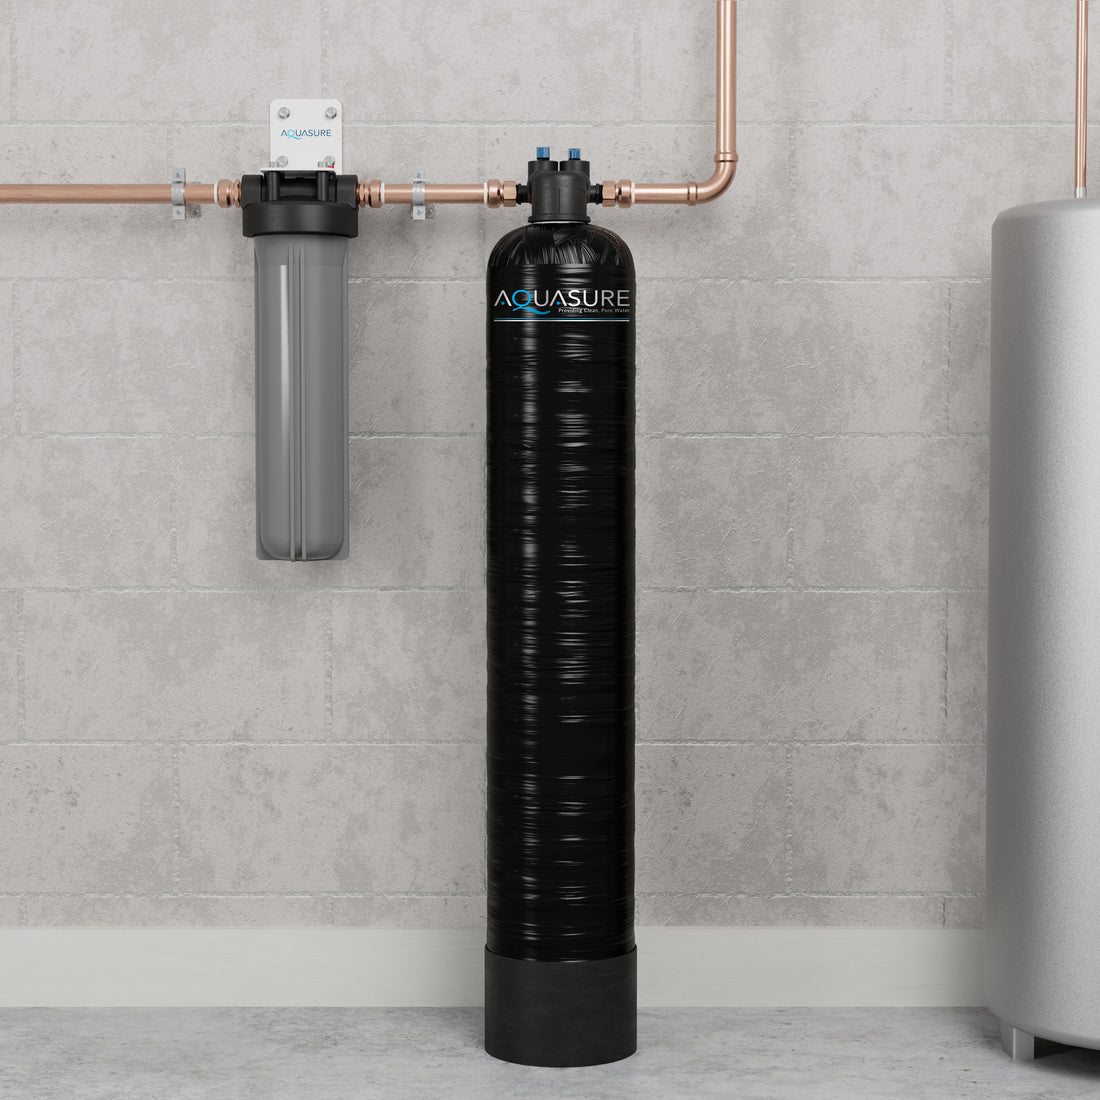 Serene Series | 10 GPM Whole House Salt-Free Water Conditioning/Softening System with Triple Purpose Pre-Filter